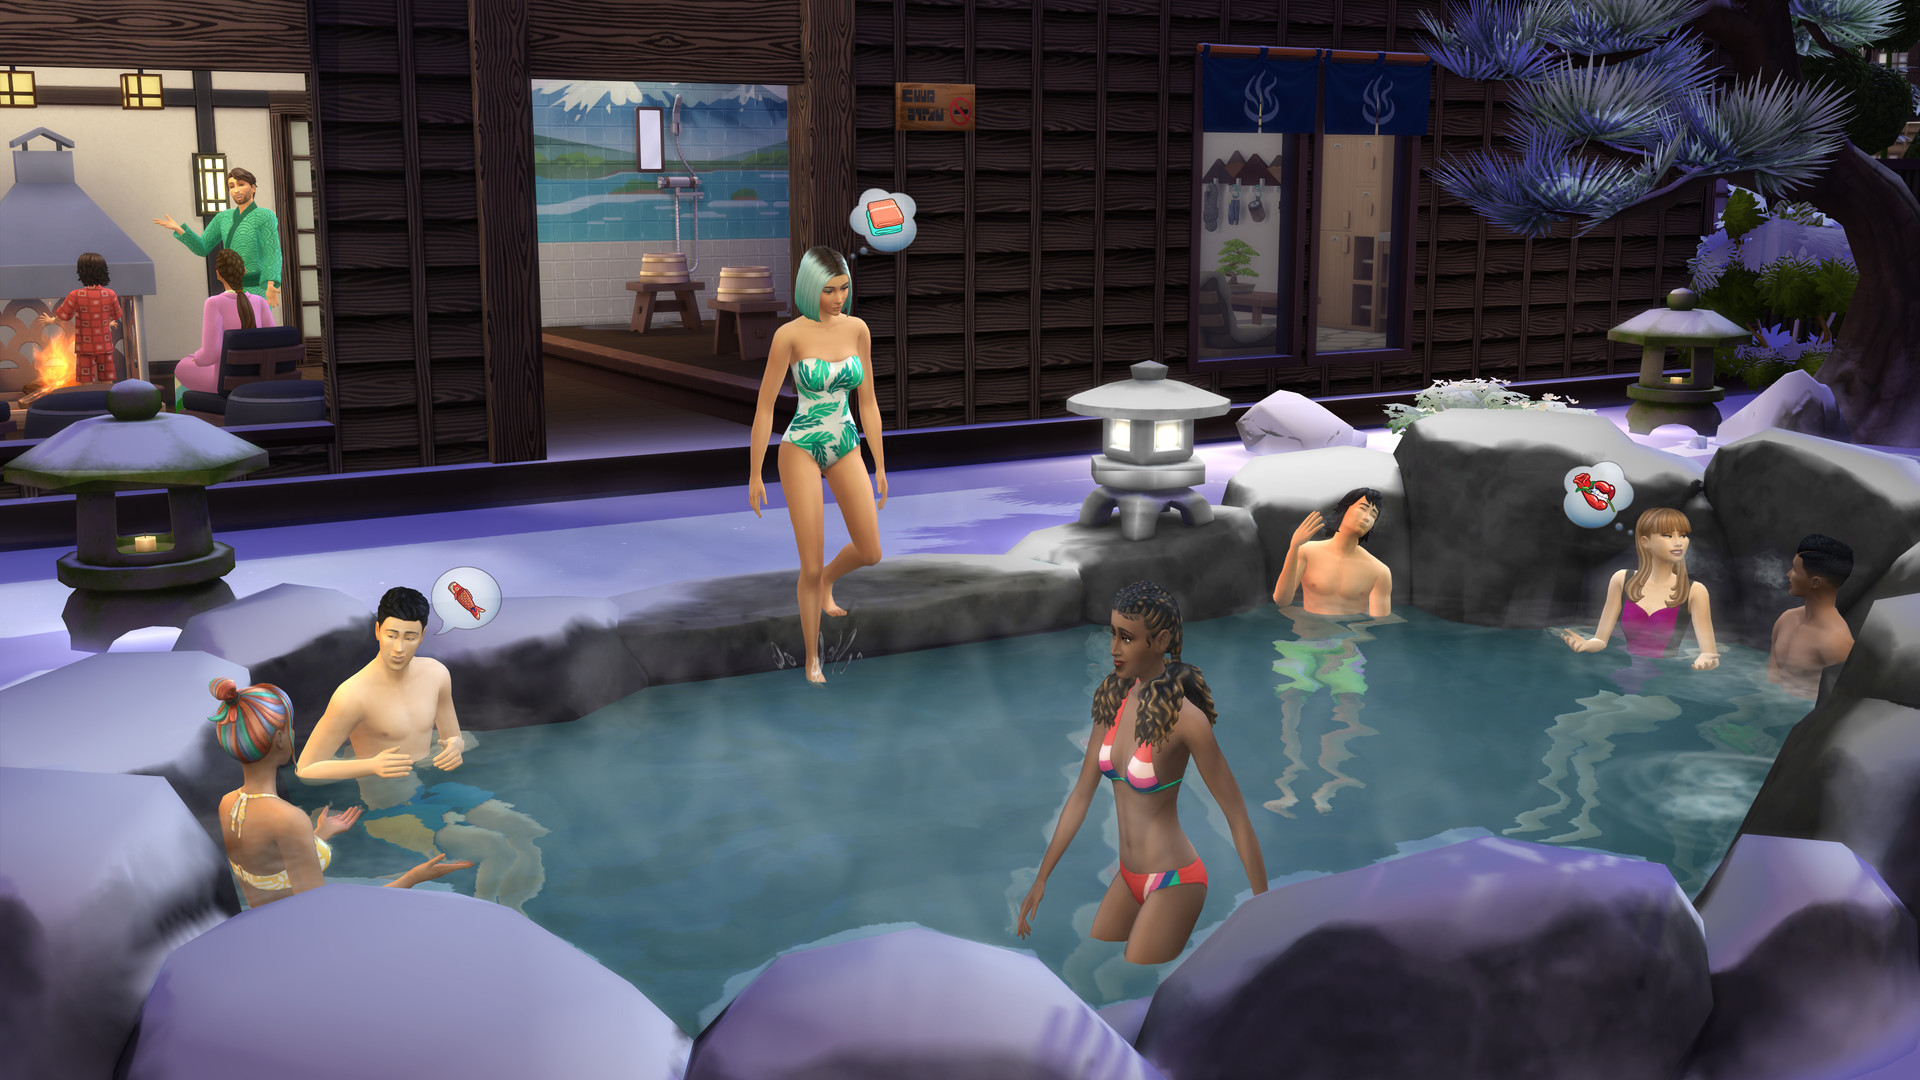 The Sims 4: Snowy Escape Free Download